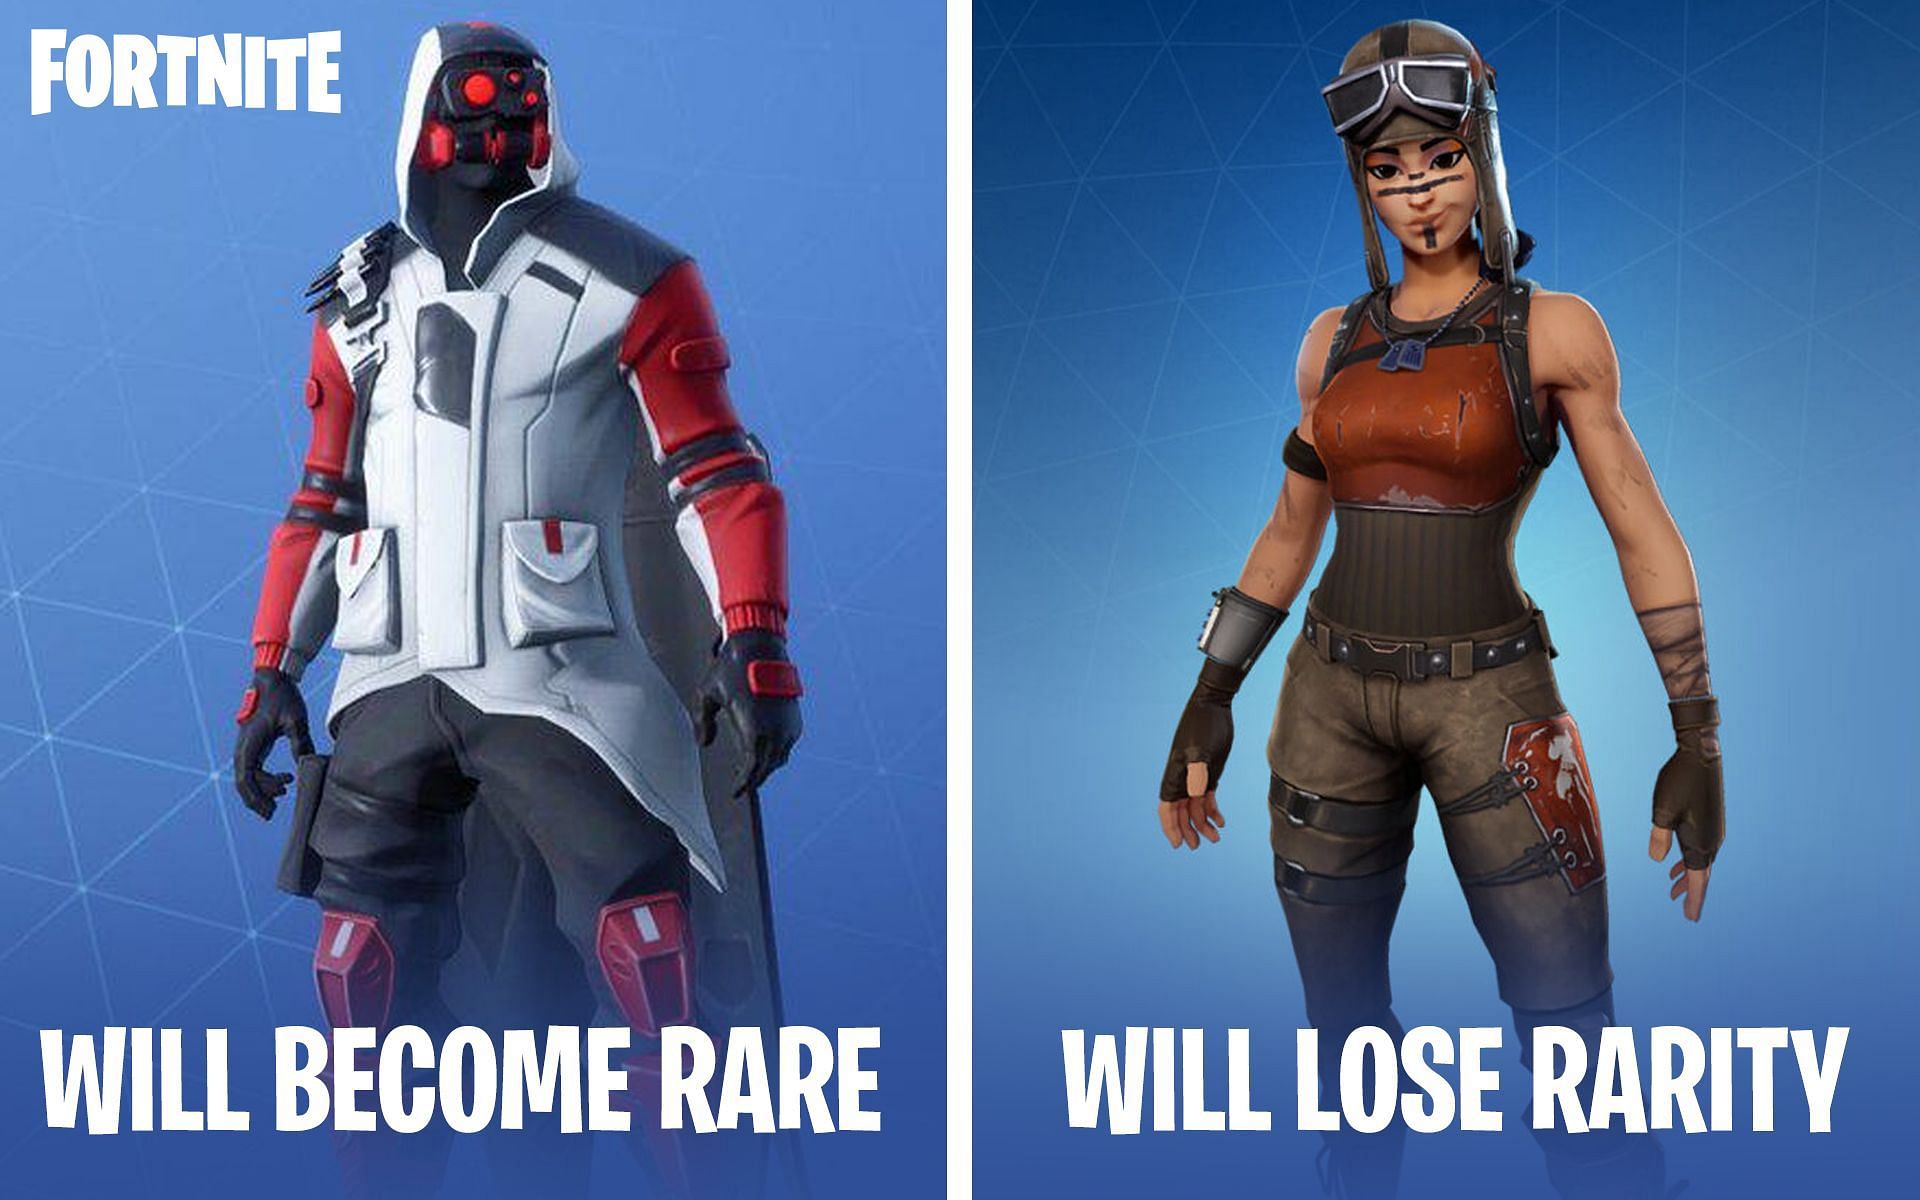 lunken Vend om barbering 8 Fortnite skins that will become extremely rare in 2022 (& 2 that'll lose  their rare status)